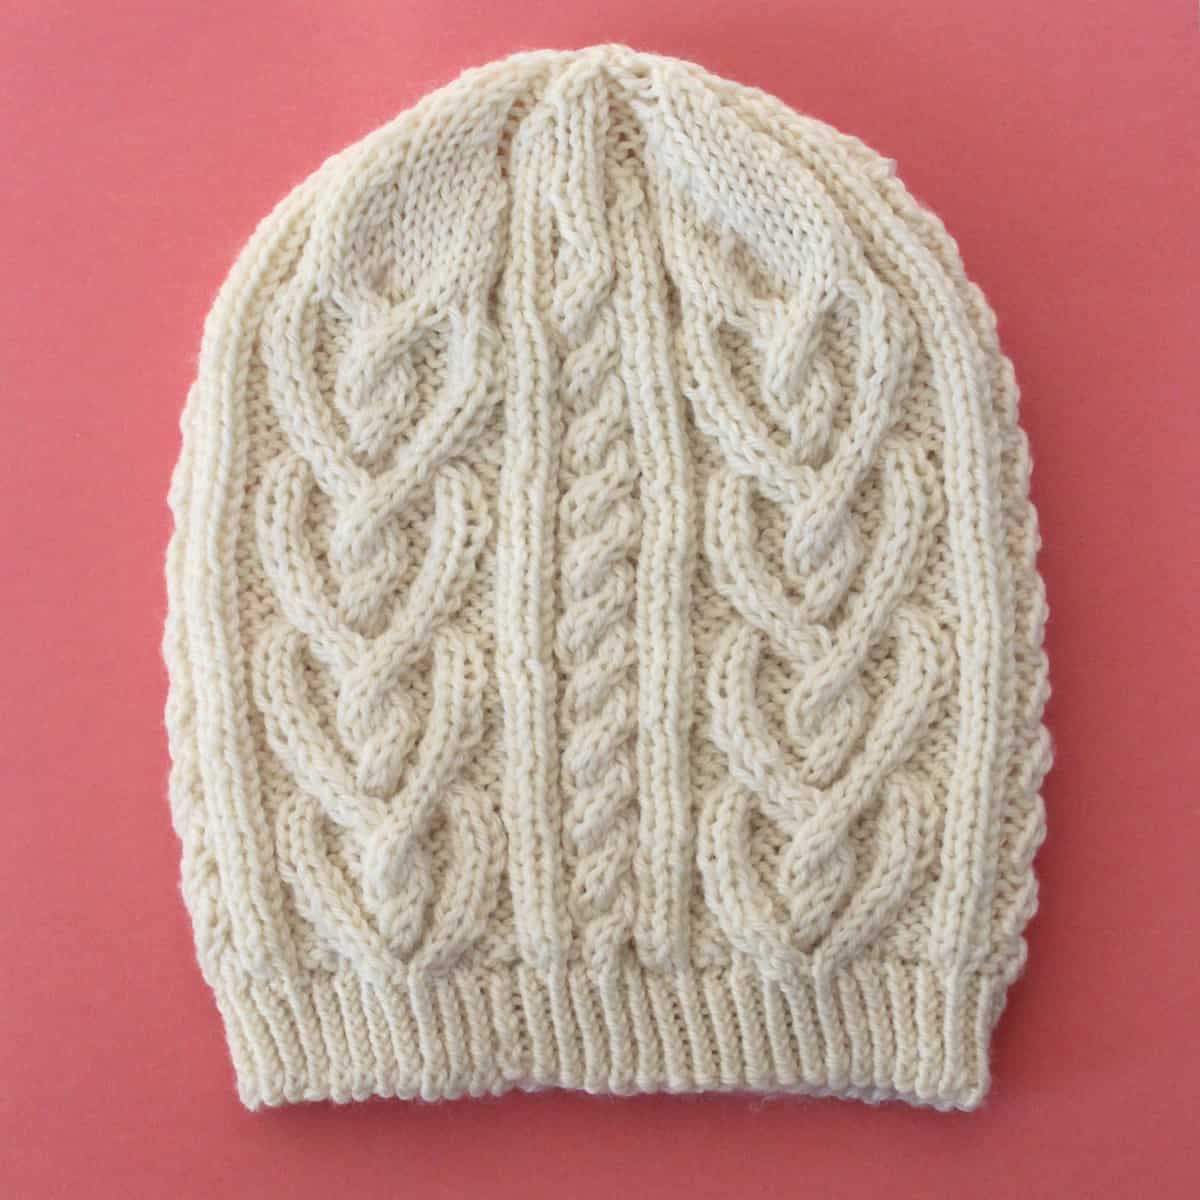 Knit Cable Beanie FREE Knitting Pattern - Julie Measures